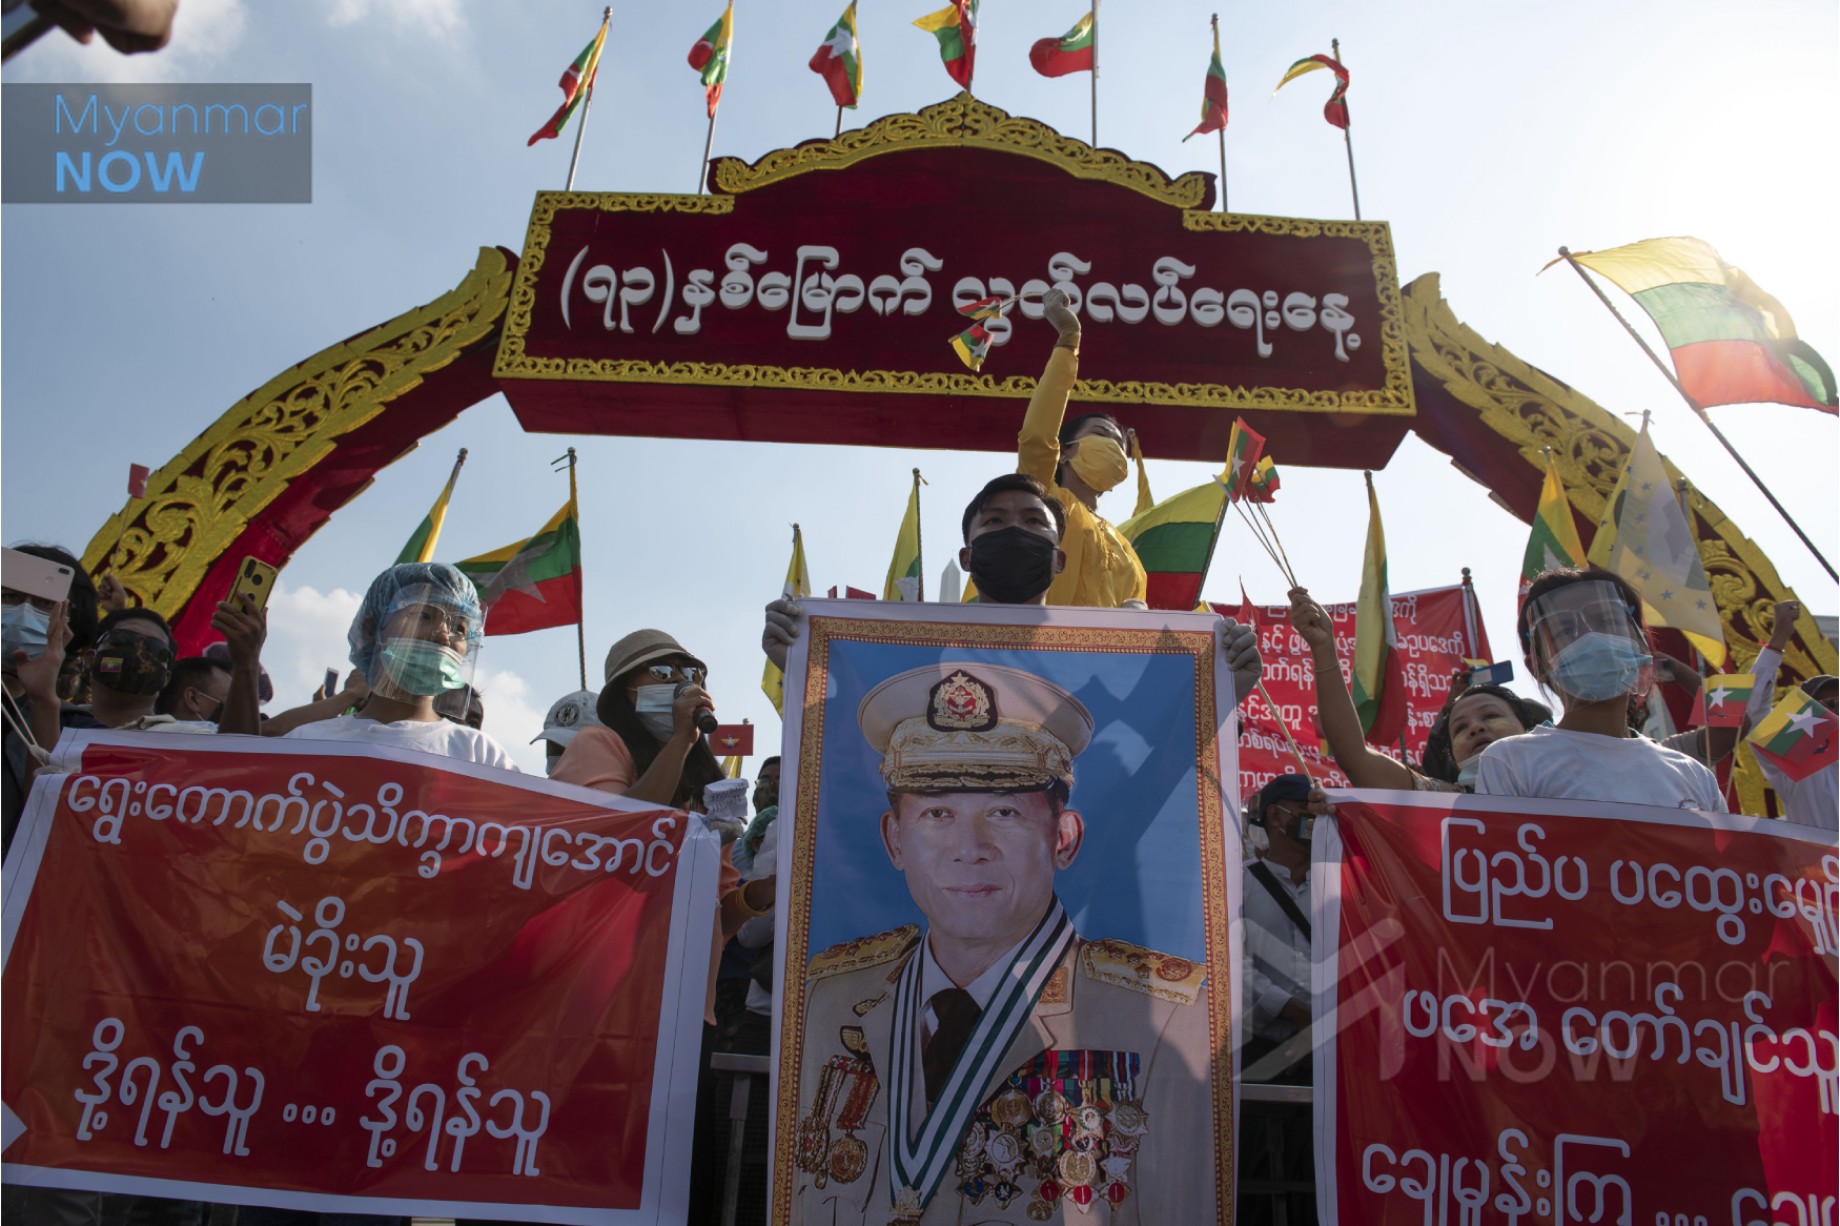 Pro-military protestors gathered in front of City Hall in Yangon to accuse the Union Election Commission of ‘fraud’ (Sai Zaw/Myanmar Now)